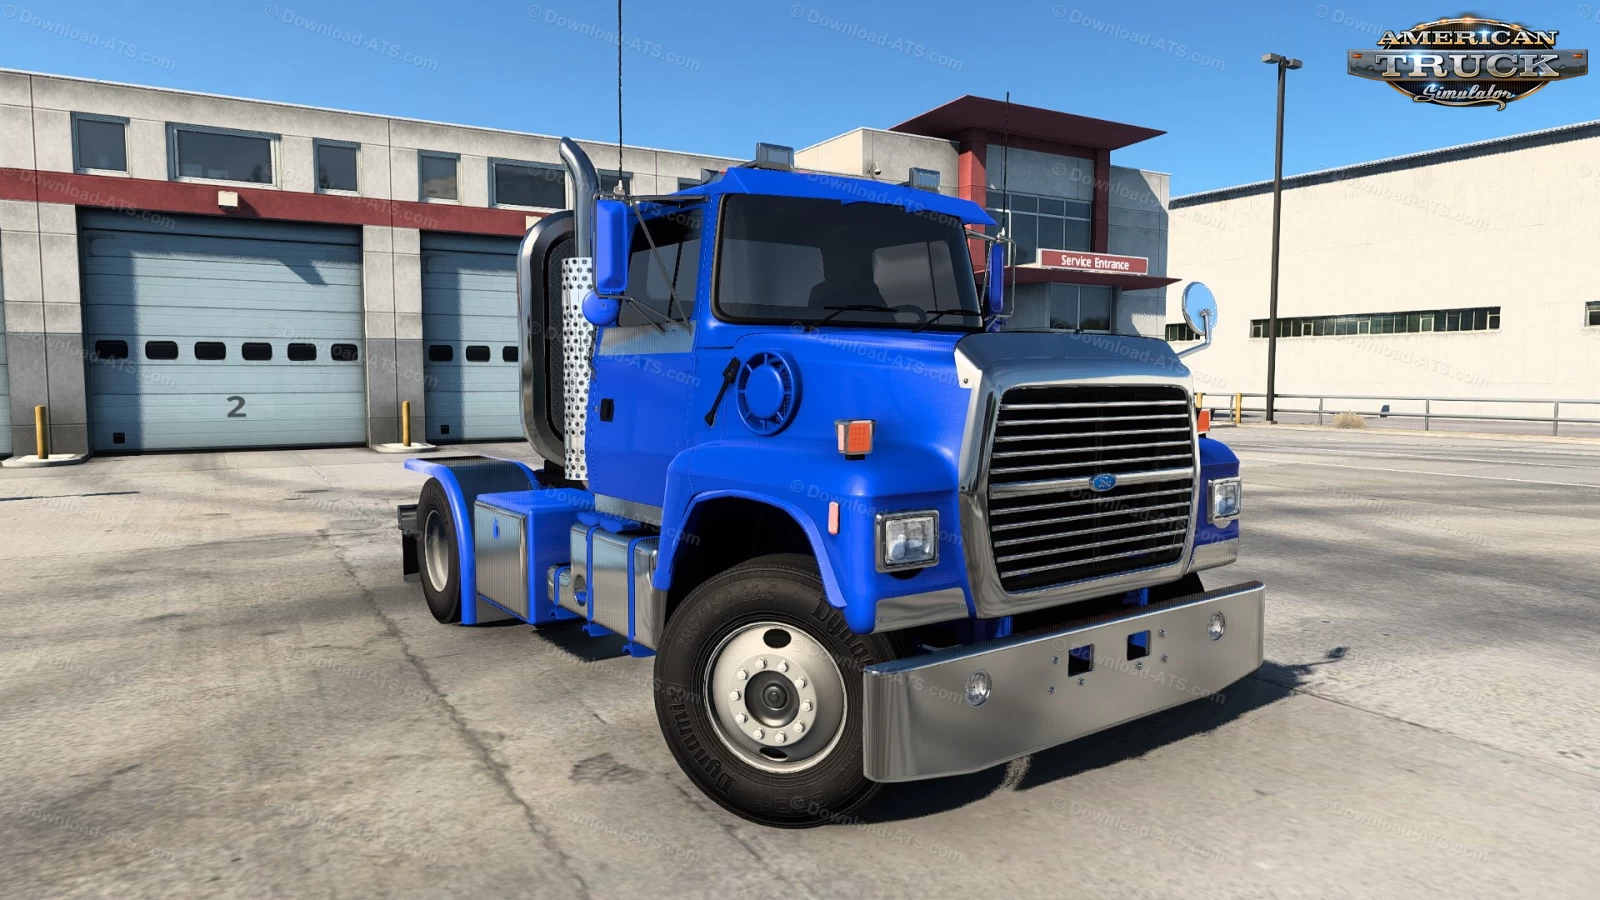 Ford L-Series Custom v1.5 by ReneNate (1.46.x) for ATS